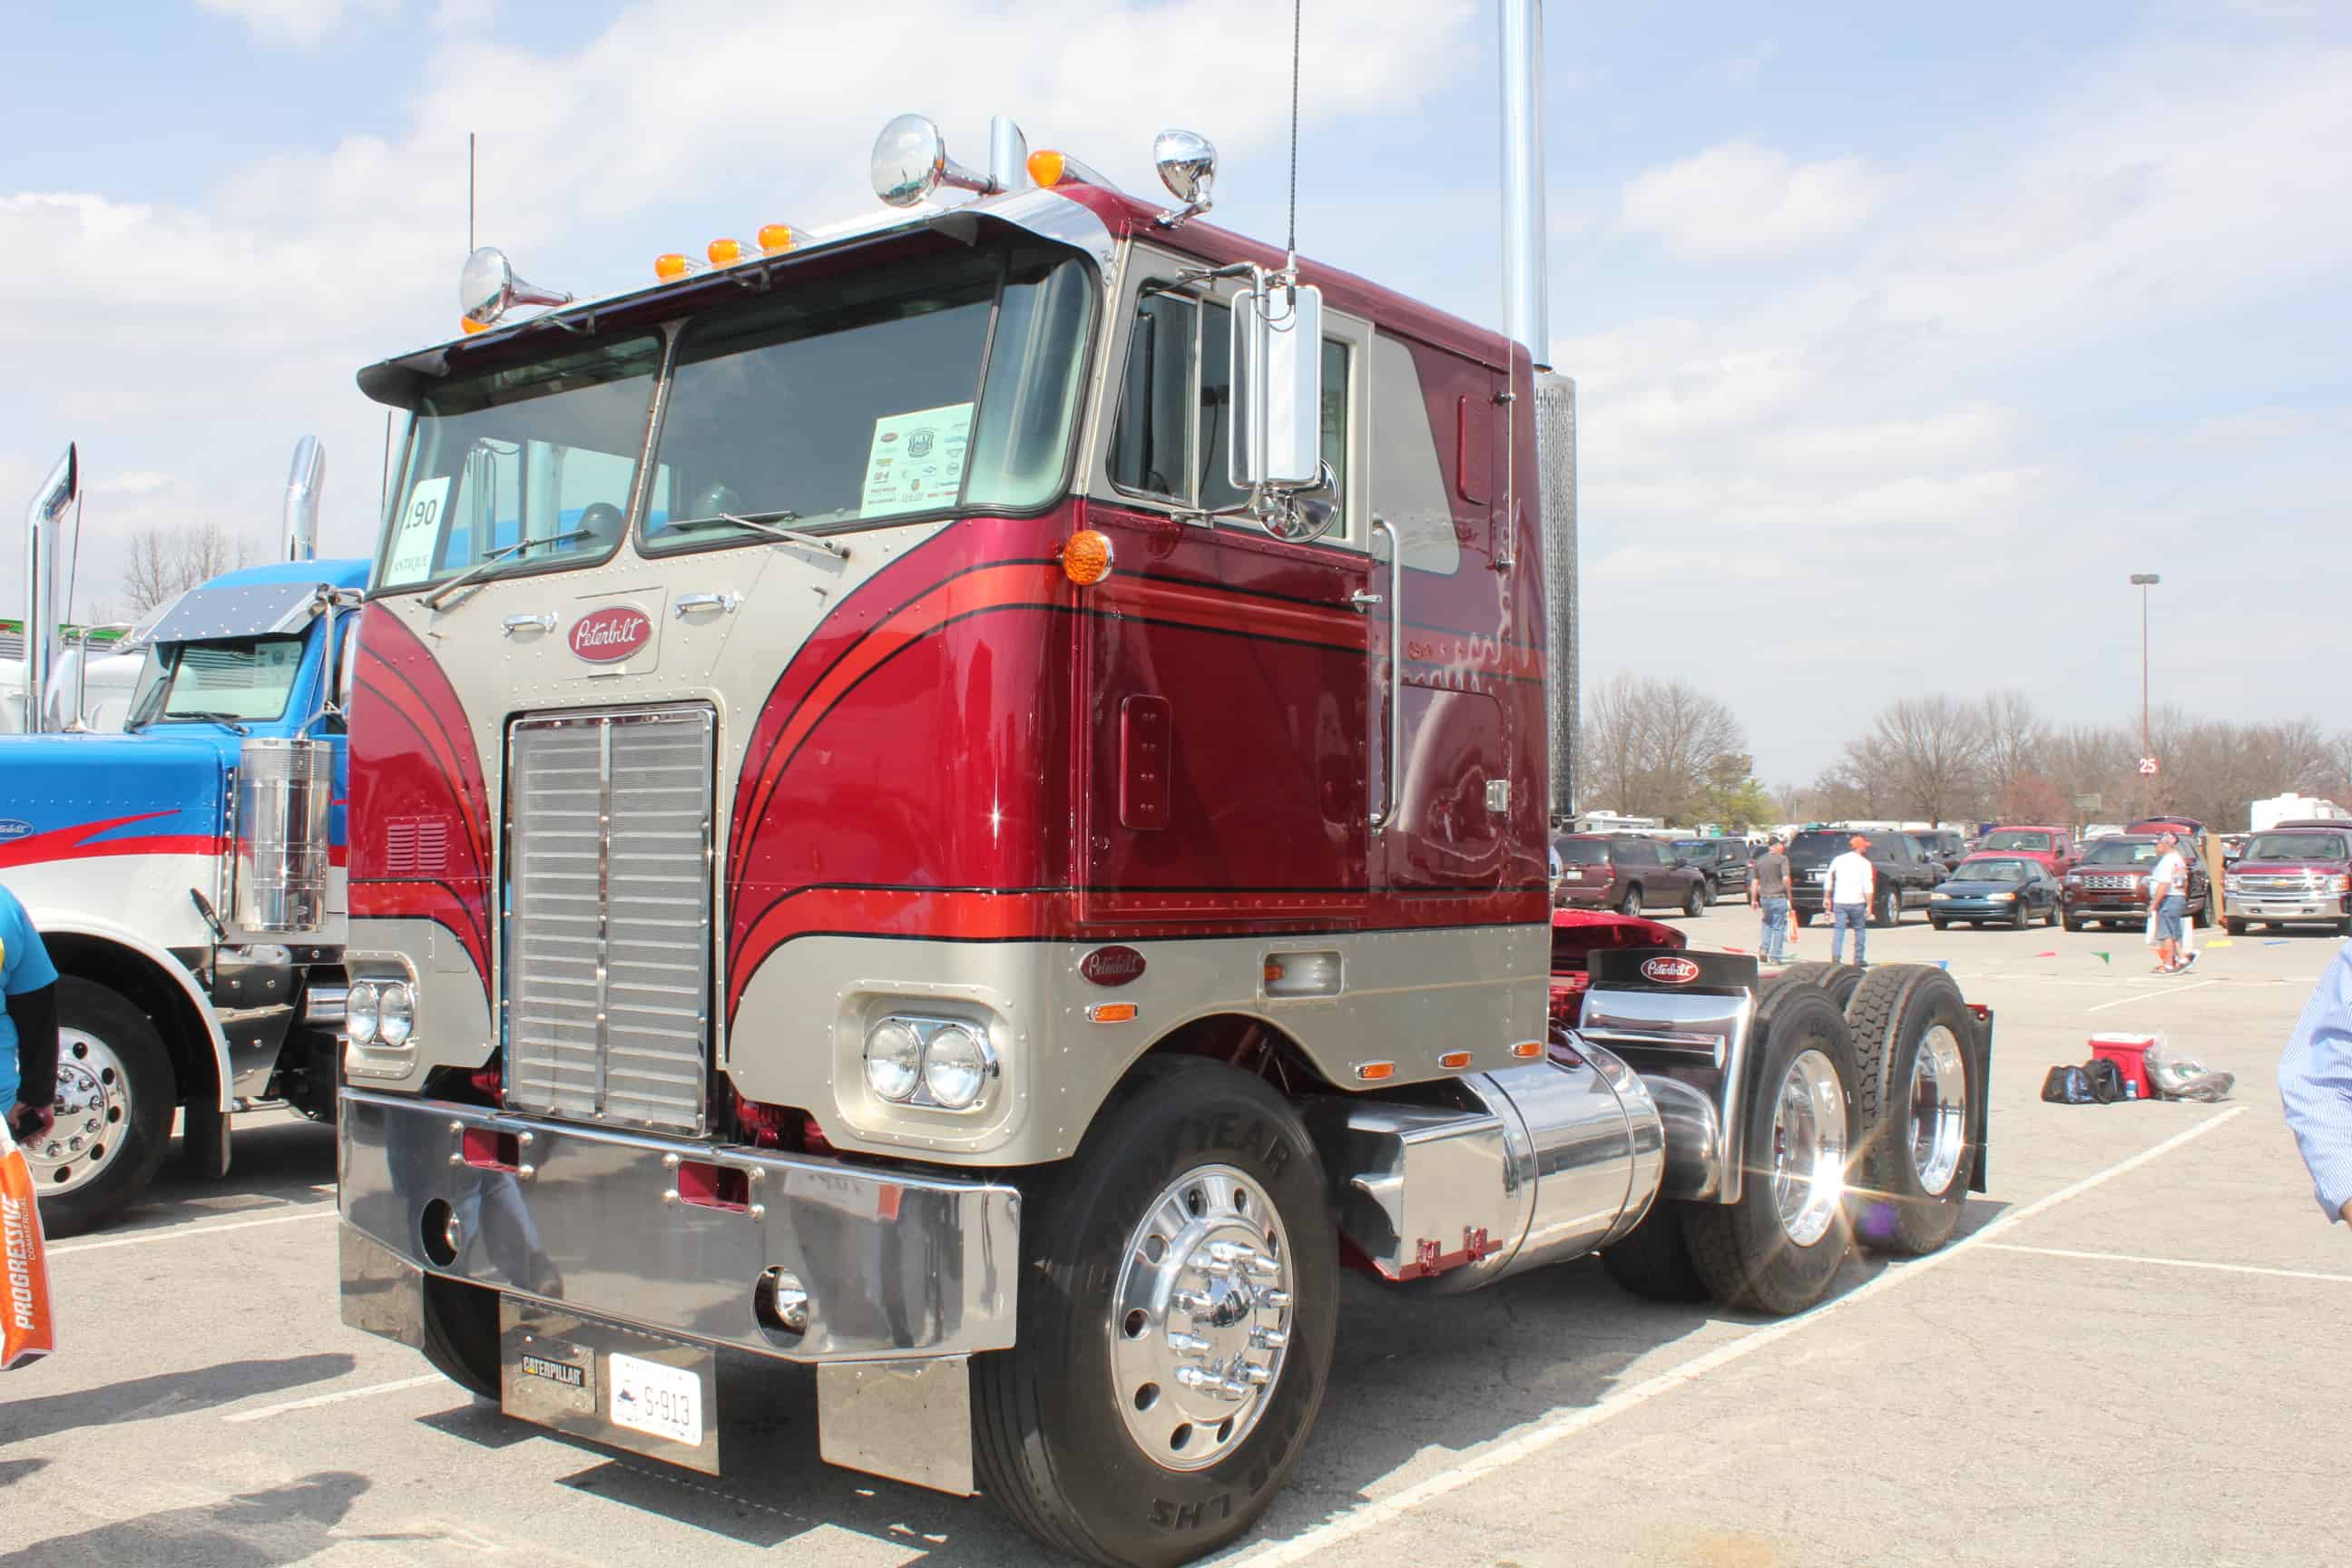 The Peterbilt  Cabover  Truck  Photo Collection You Need To See 